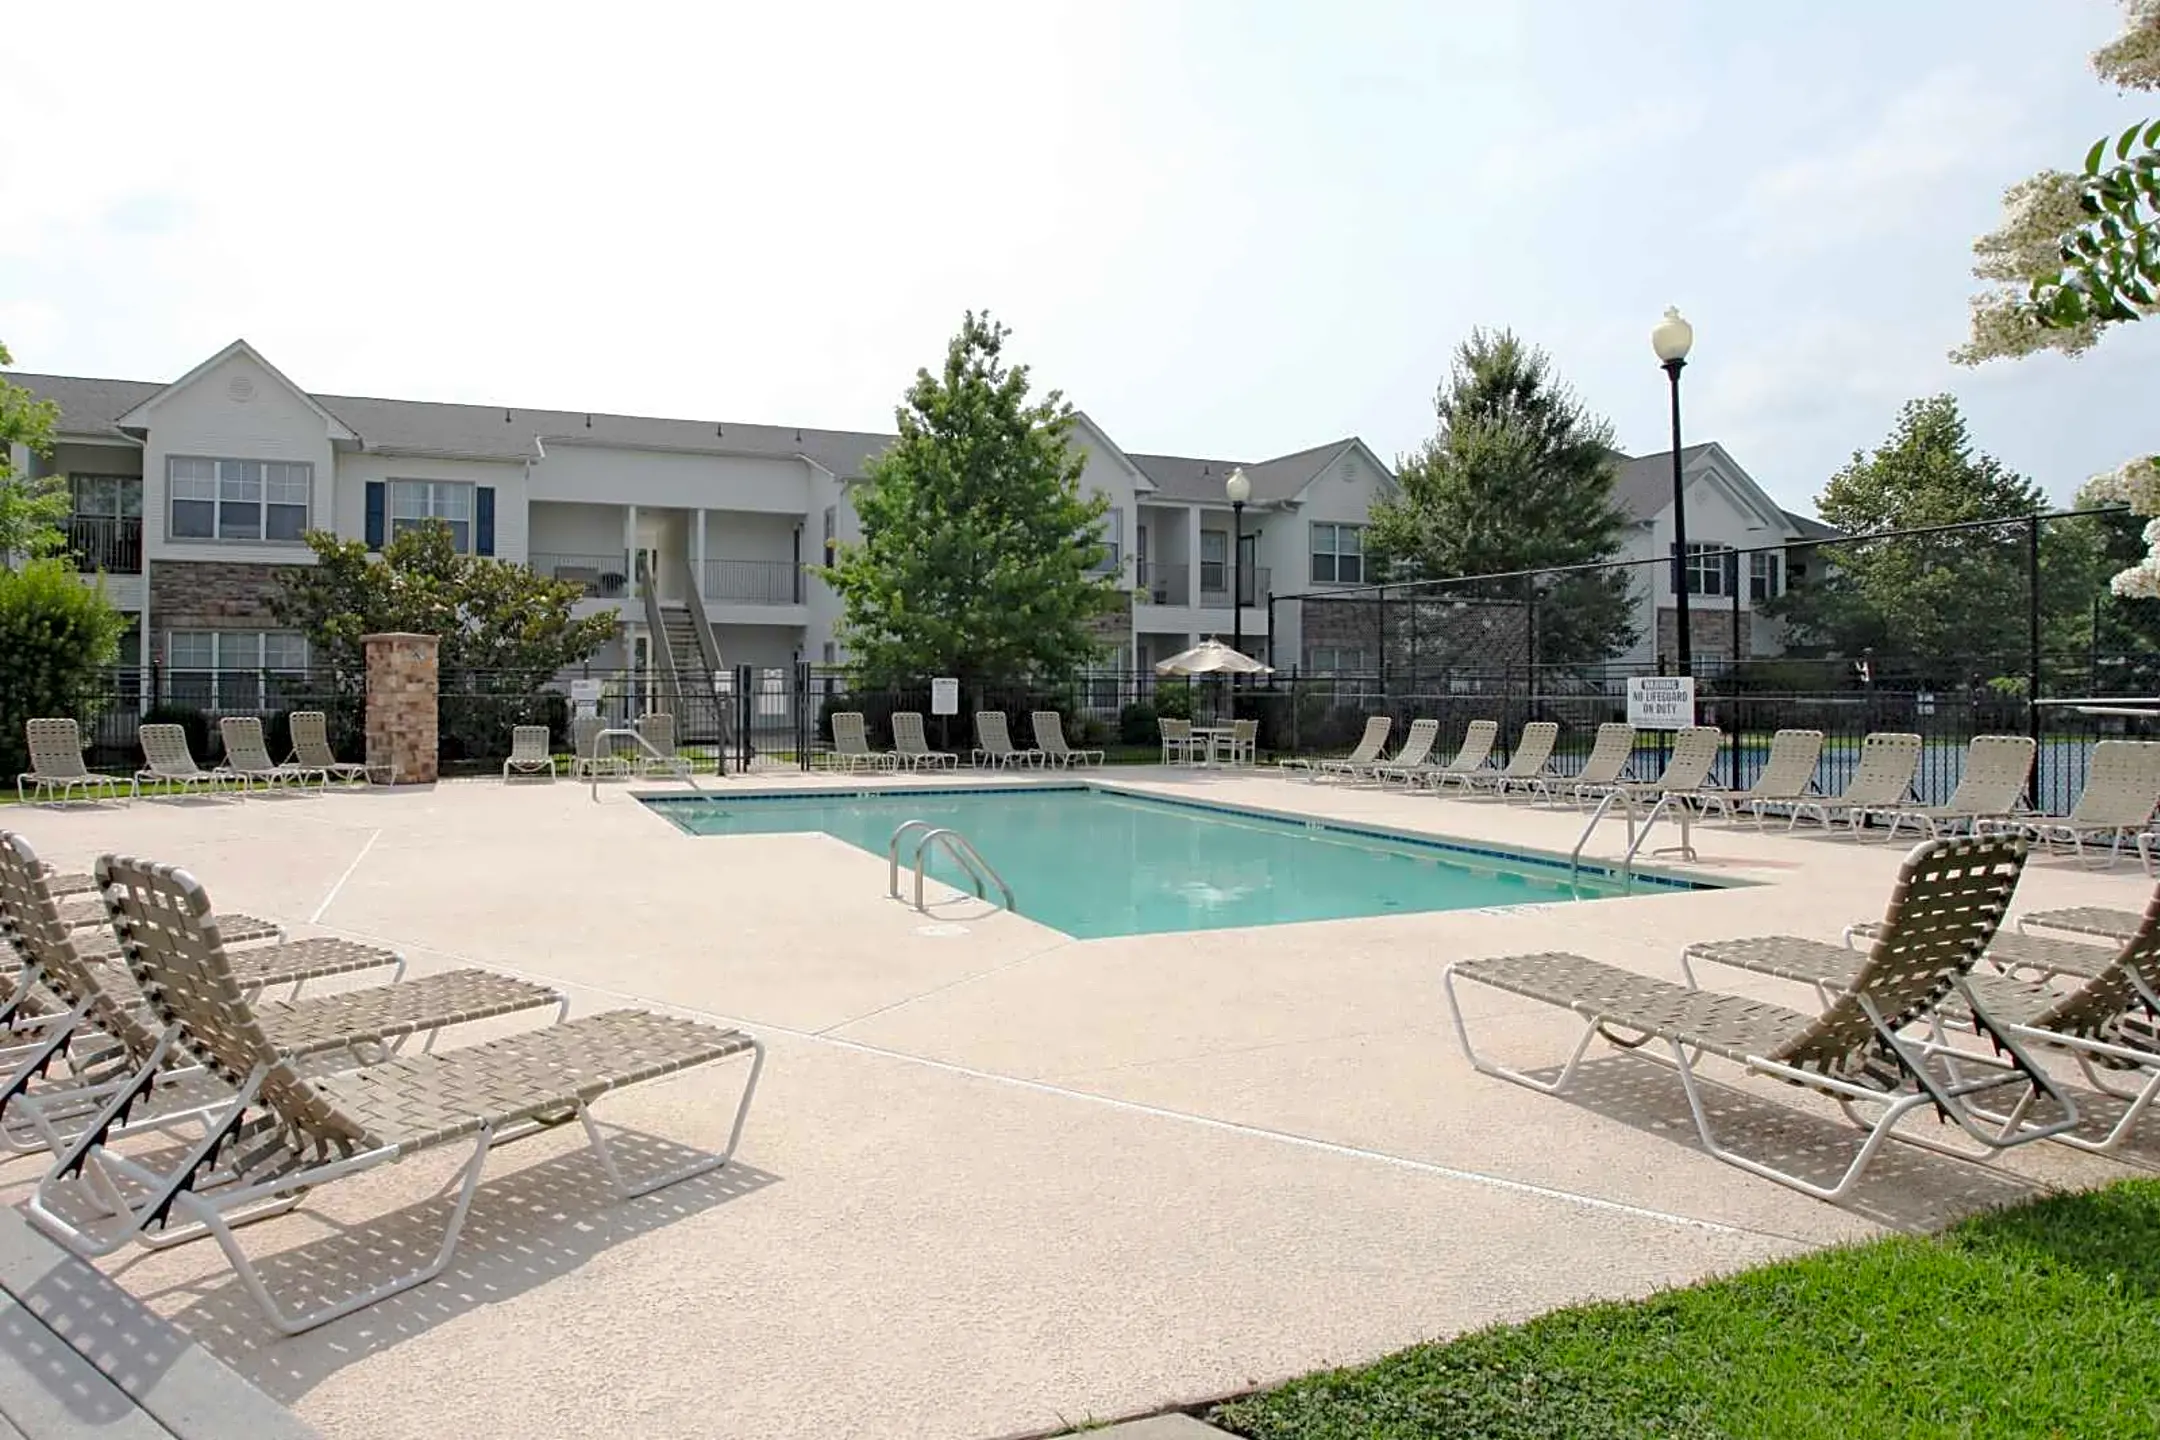 Pool - The Pointe at Wimbledon - Greenville, NC